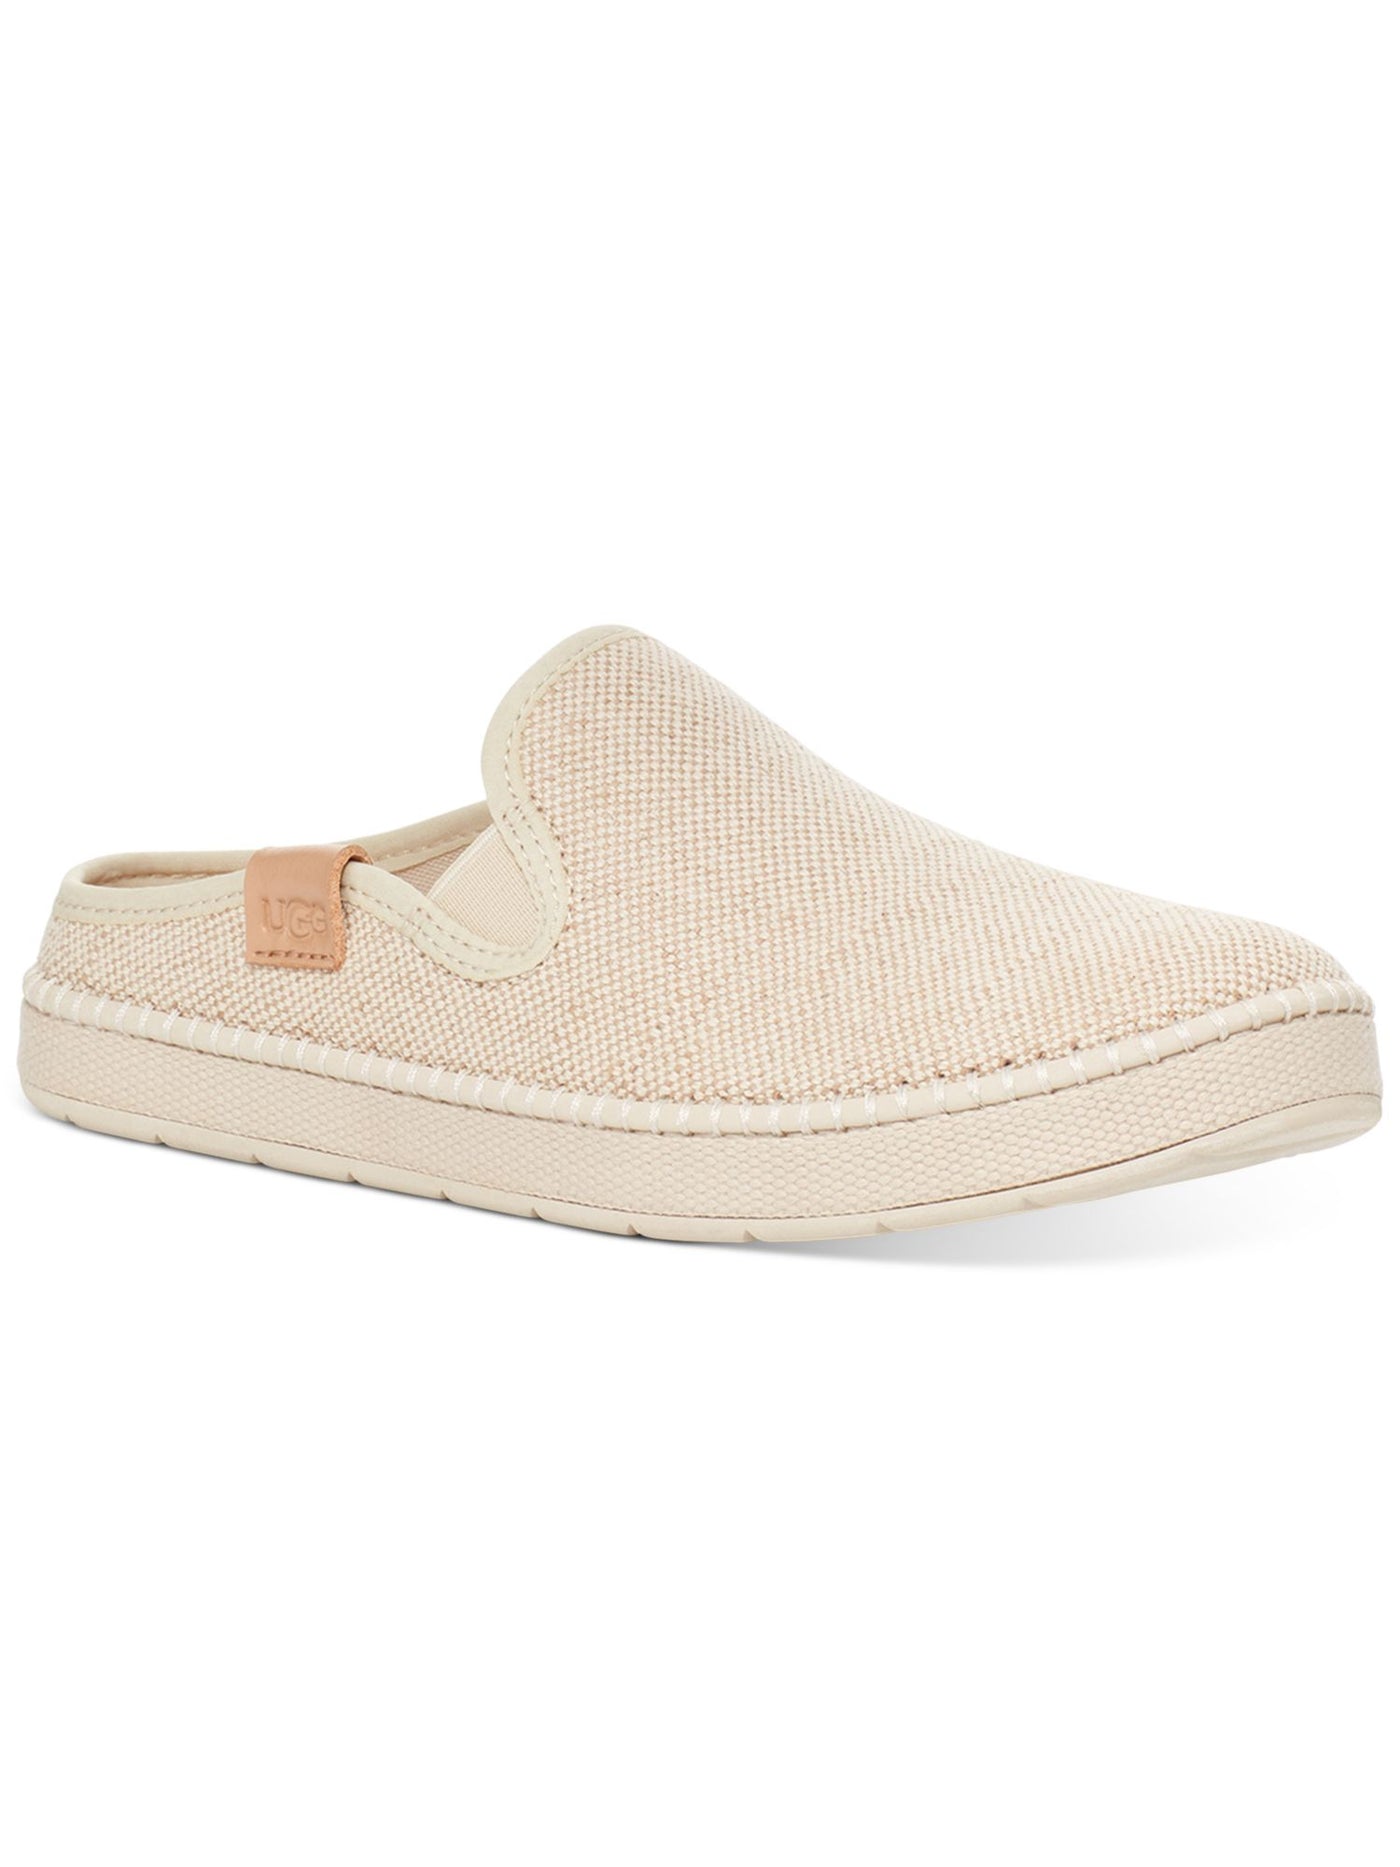 UGG Womens Beige Woven Goring Removable Insole Cushioned Delu Round Toe Platform Slip On Mules 6